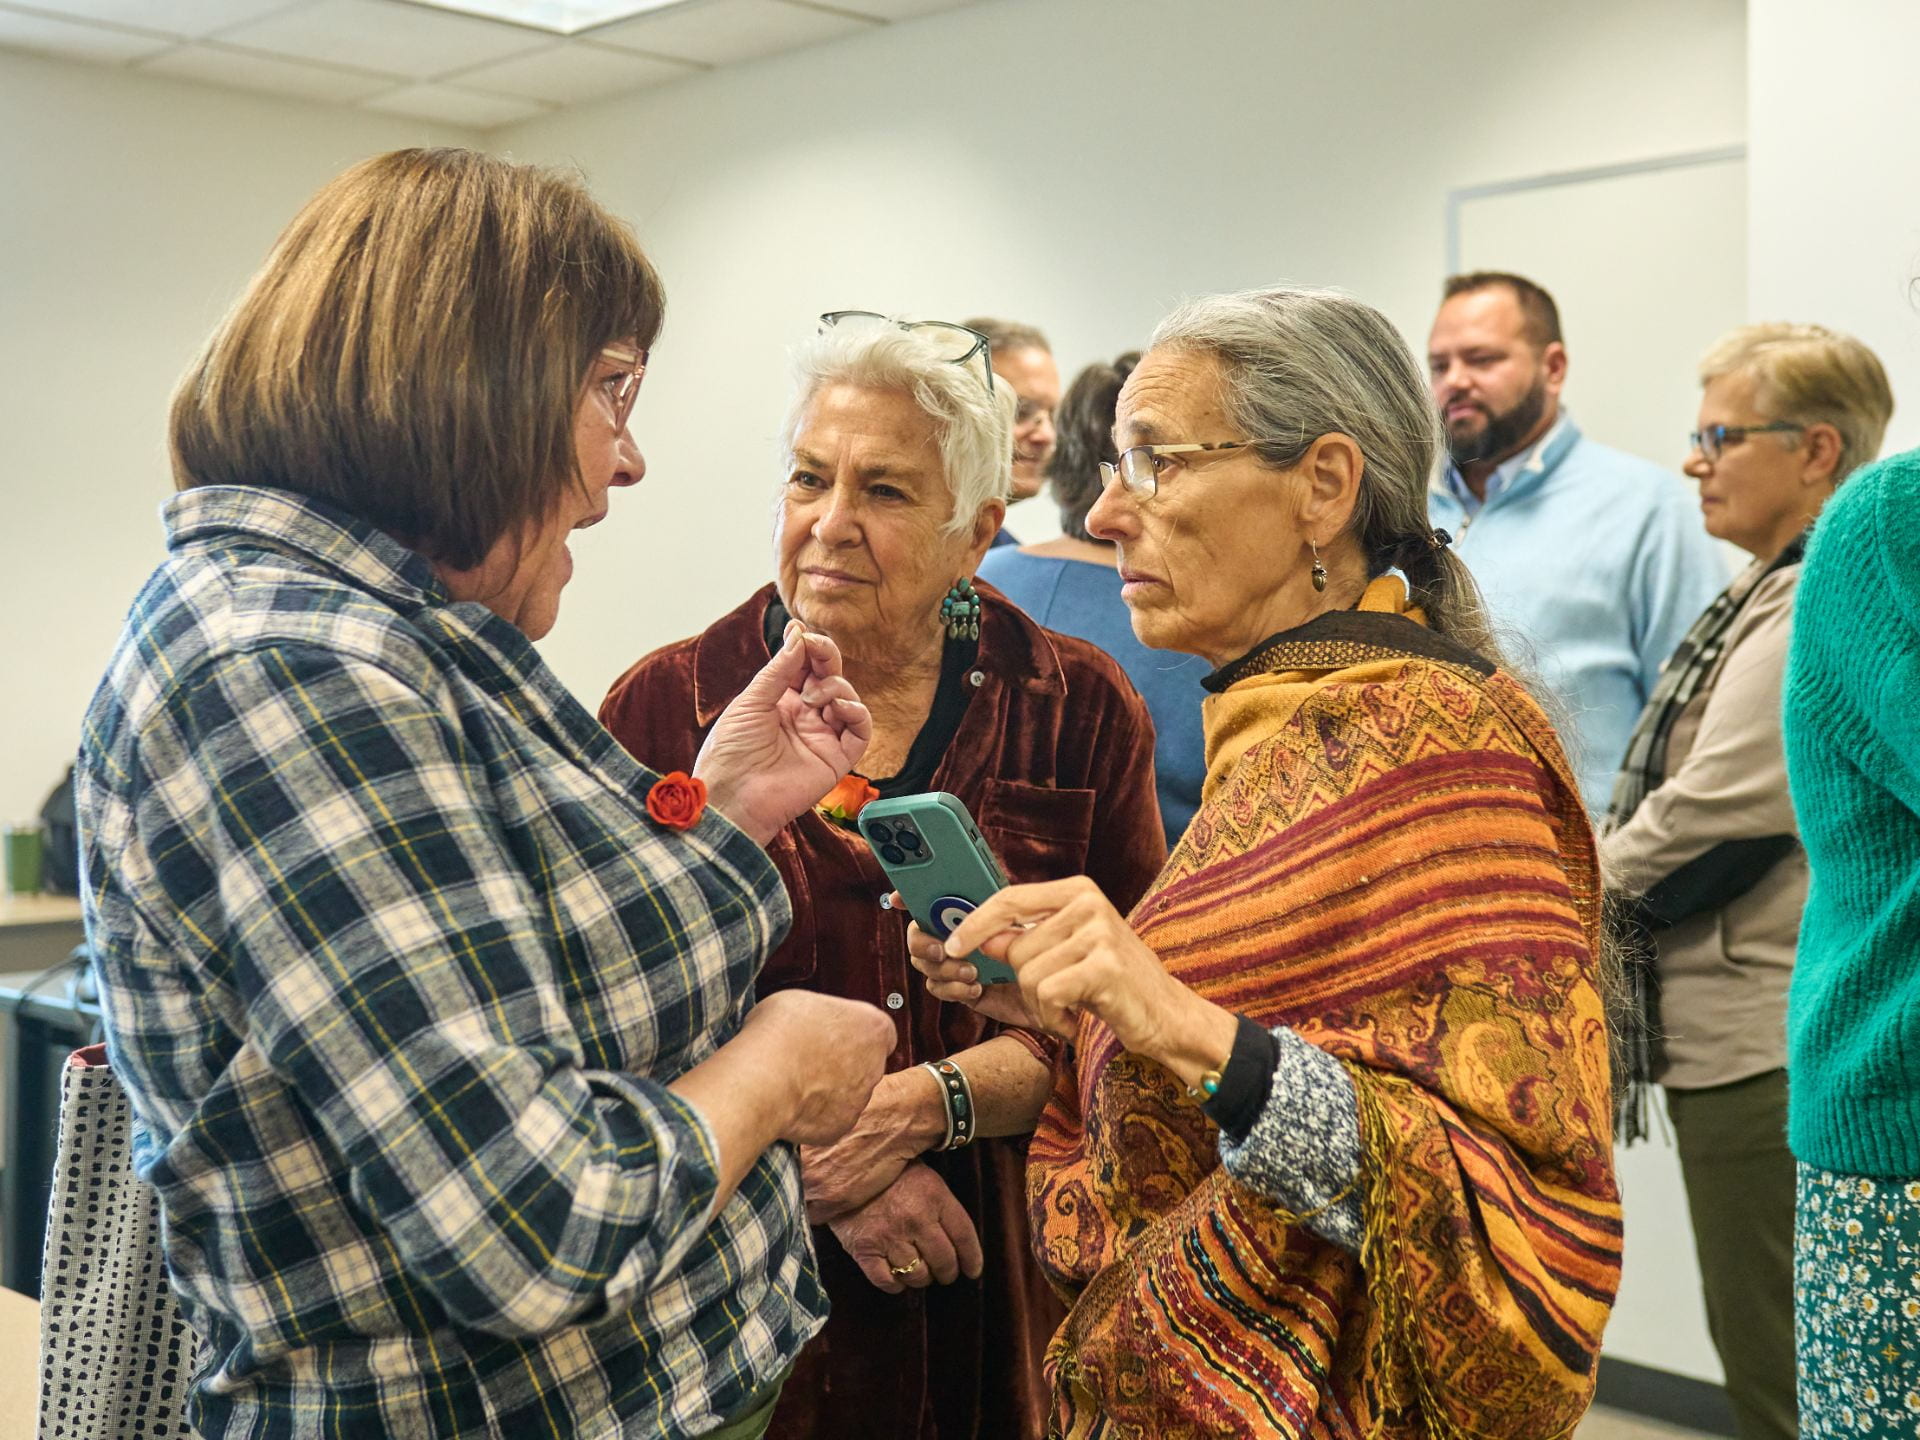 Three women speak in a tight circle inside a well-lit classroom, the one on the left in a grey flannel shirt speaking with her hands as the other two look and listen carefully. A group, out of focus, stands behind in their own circle, having their own conversation